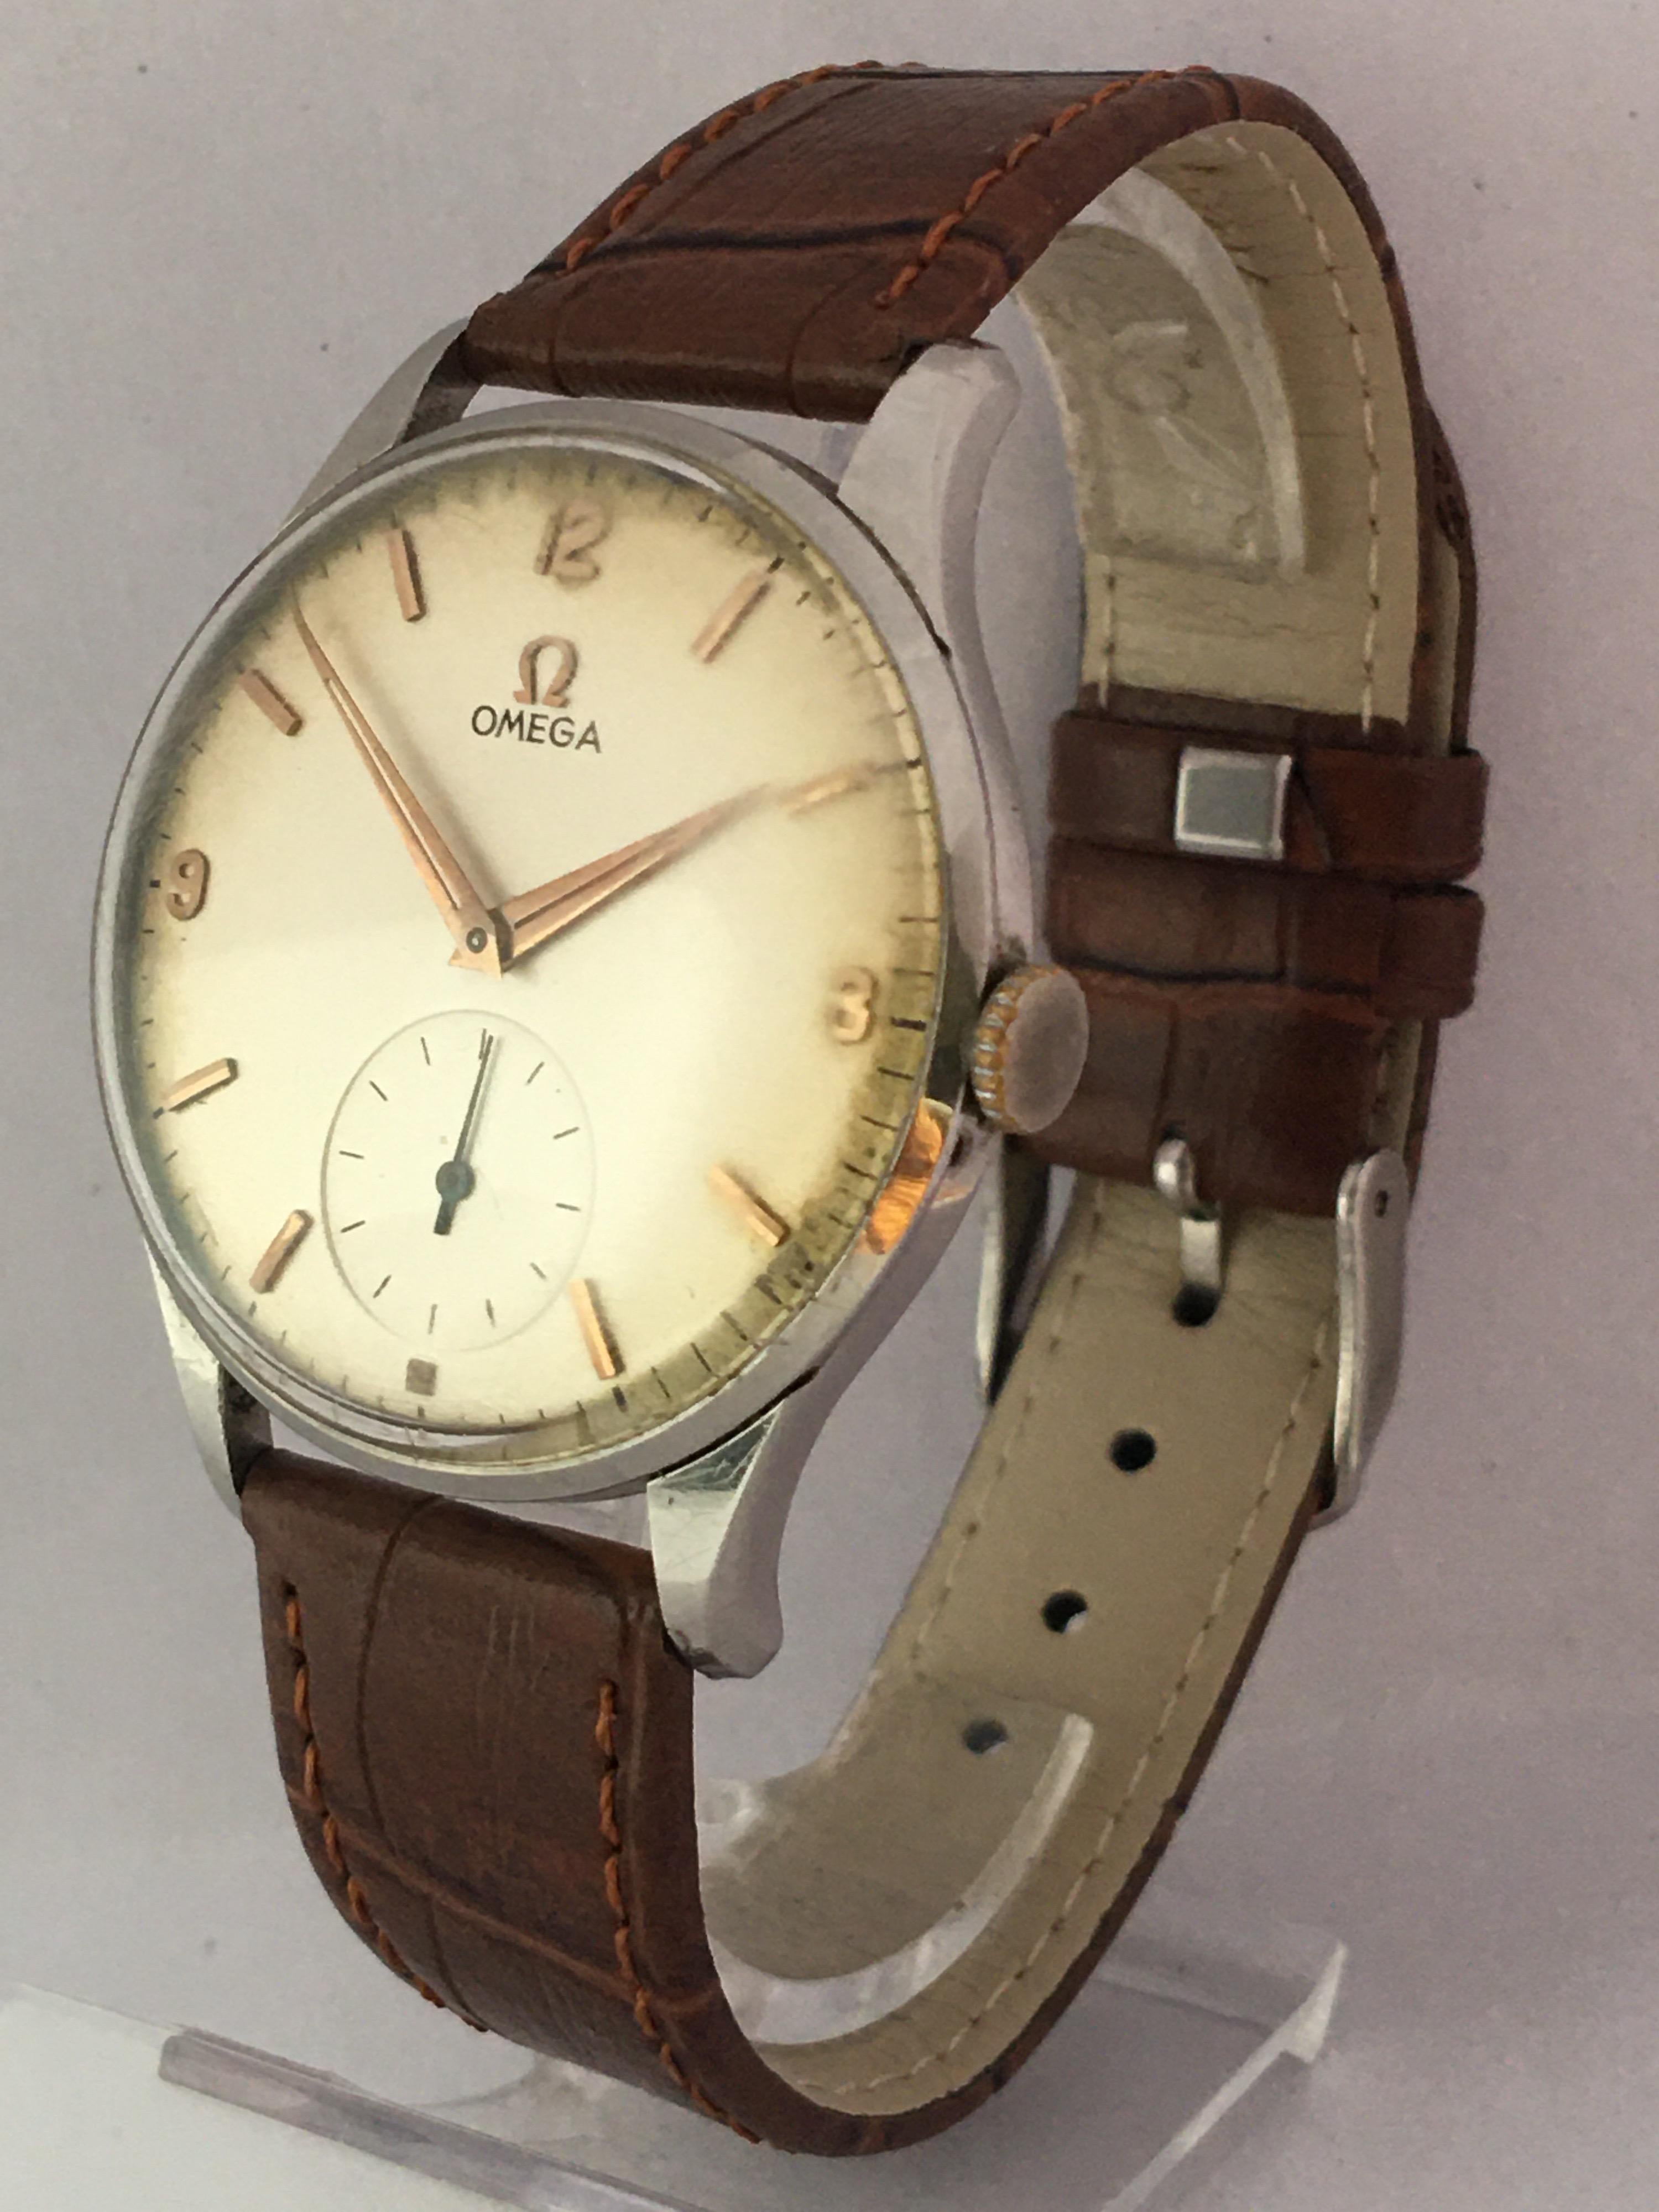 Omega stainless steel gentleman's wristwatch, circa 1956/57, serial no. 15629xxx, signed silvered dial with Arabic quarter numerals, baton markers, dauphine hands and subsidiary seconds, cal. 267 17 jewel movement, 37mm Watch diameter 

Condition